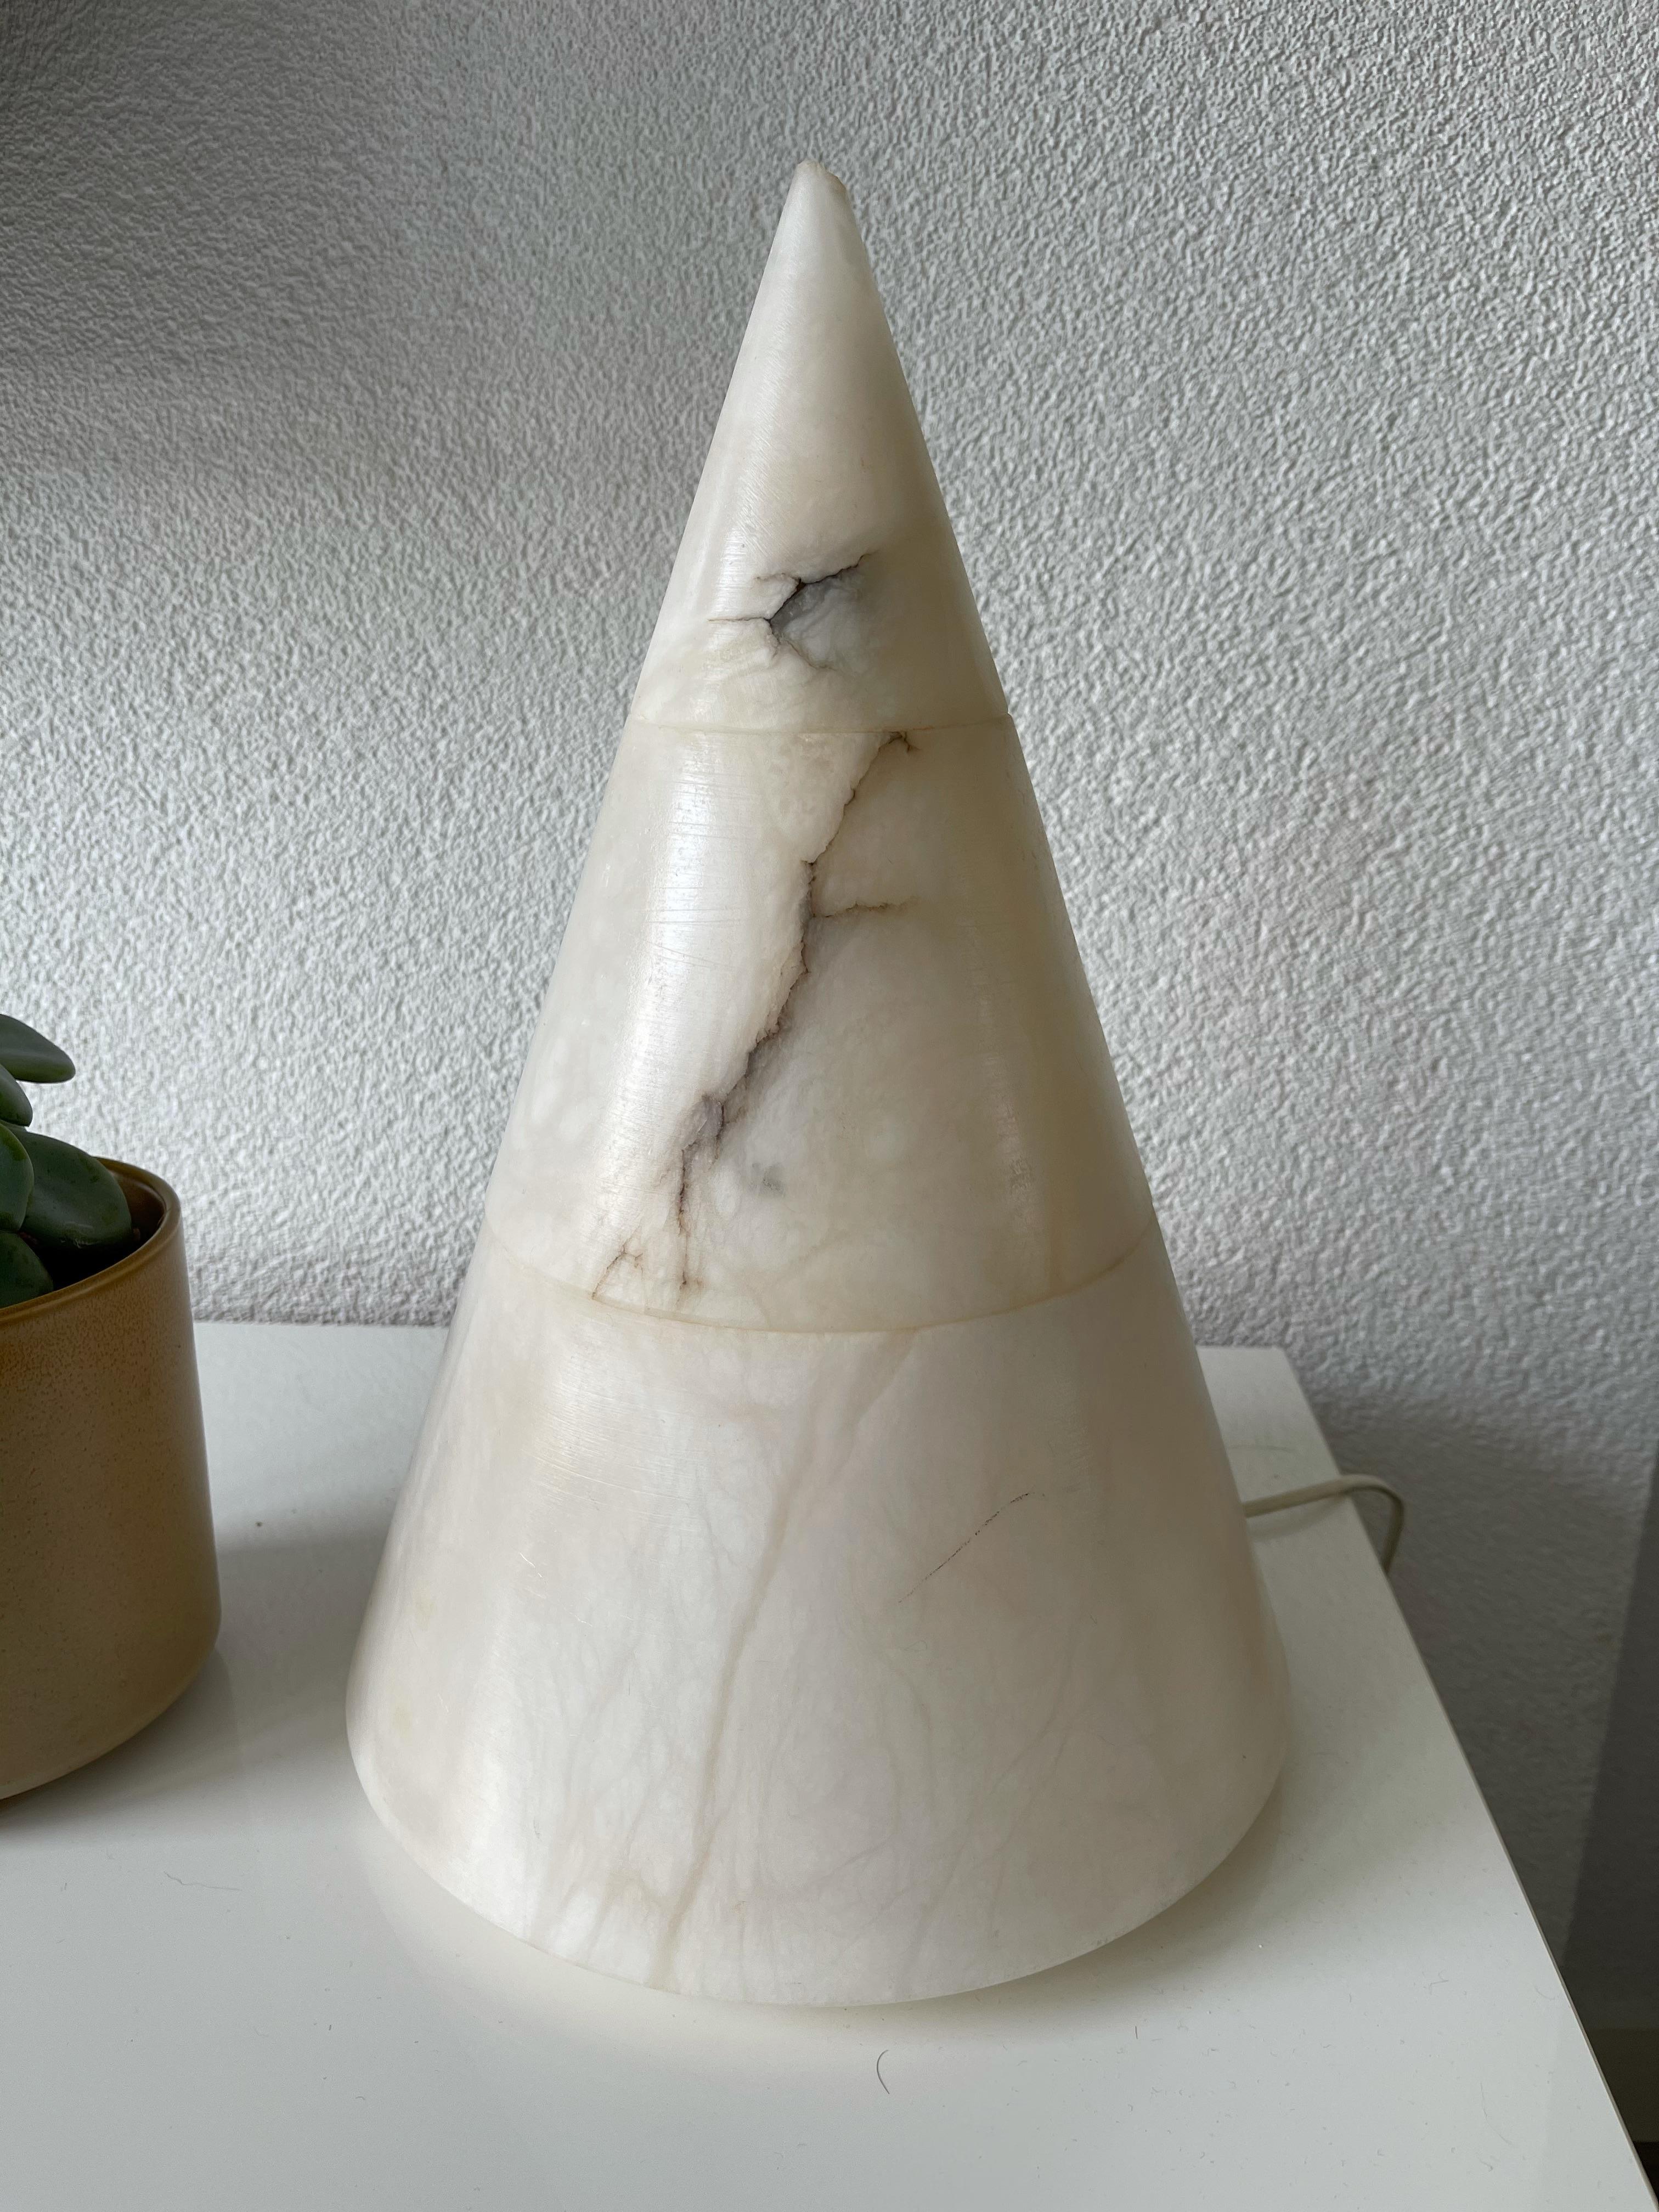 Another Mid-Century Modern Alabaster Pyramid Design and Conical Shape Table Lamp For Sale 12